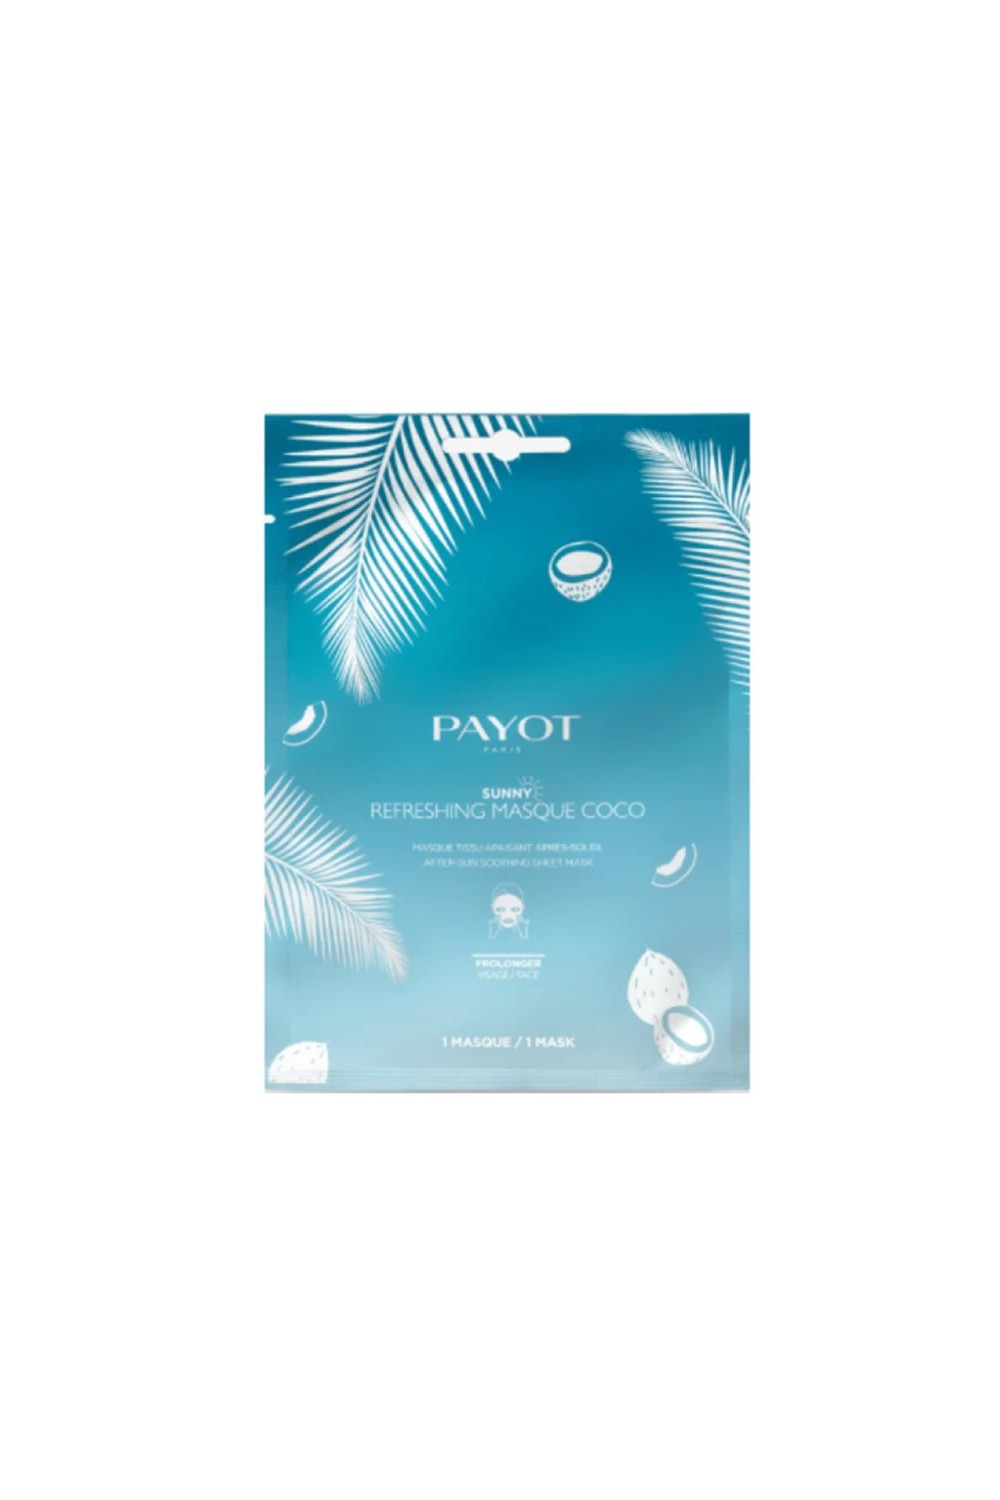 Payot Refreshing Masque Coco 1 Unit